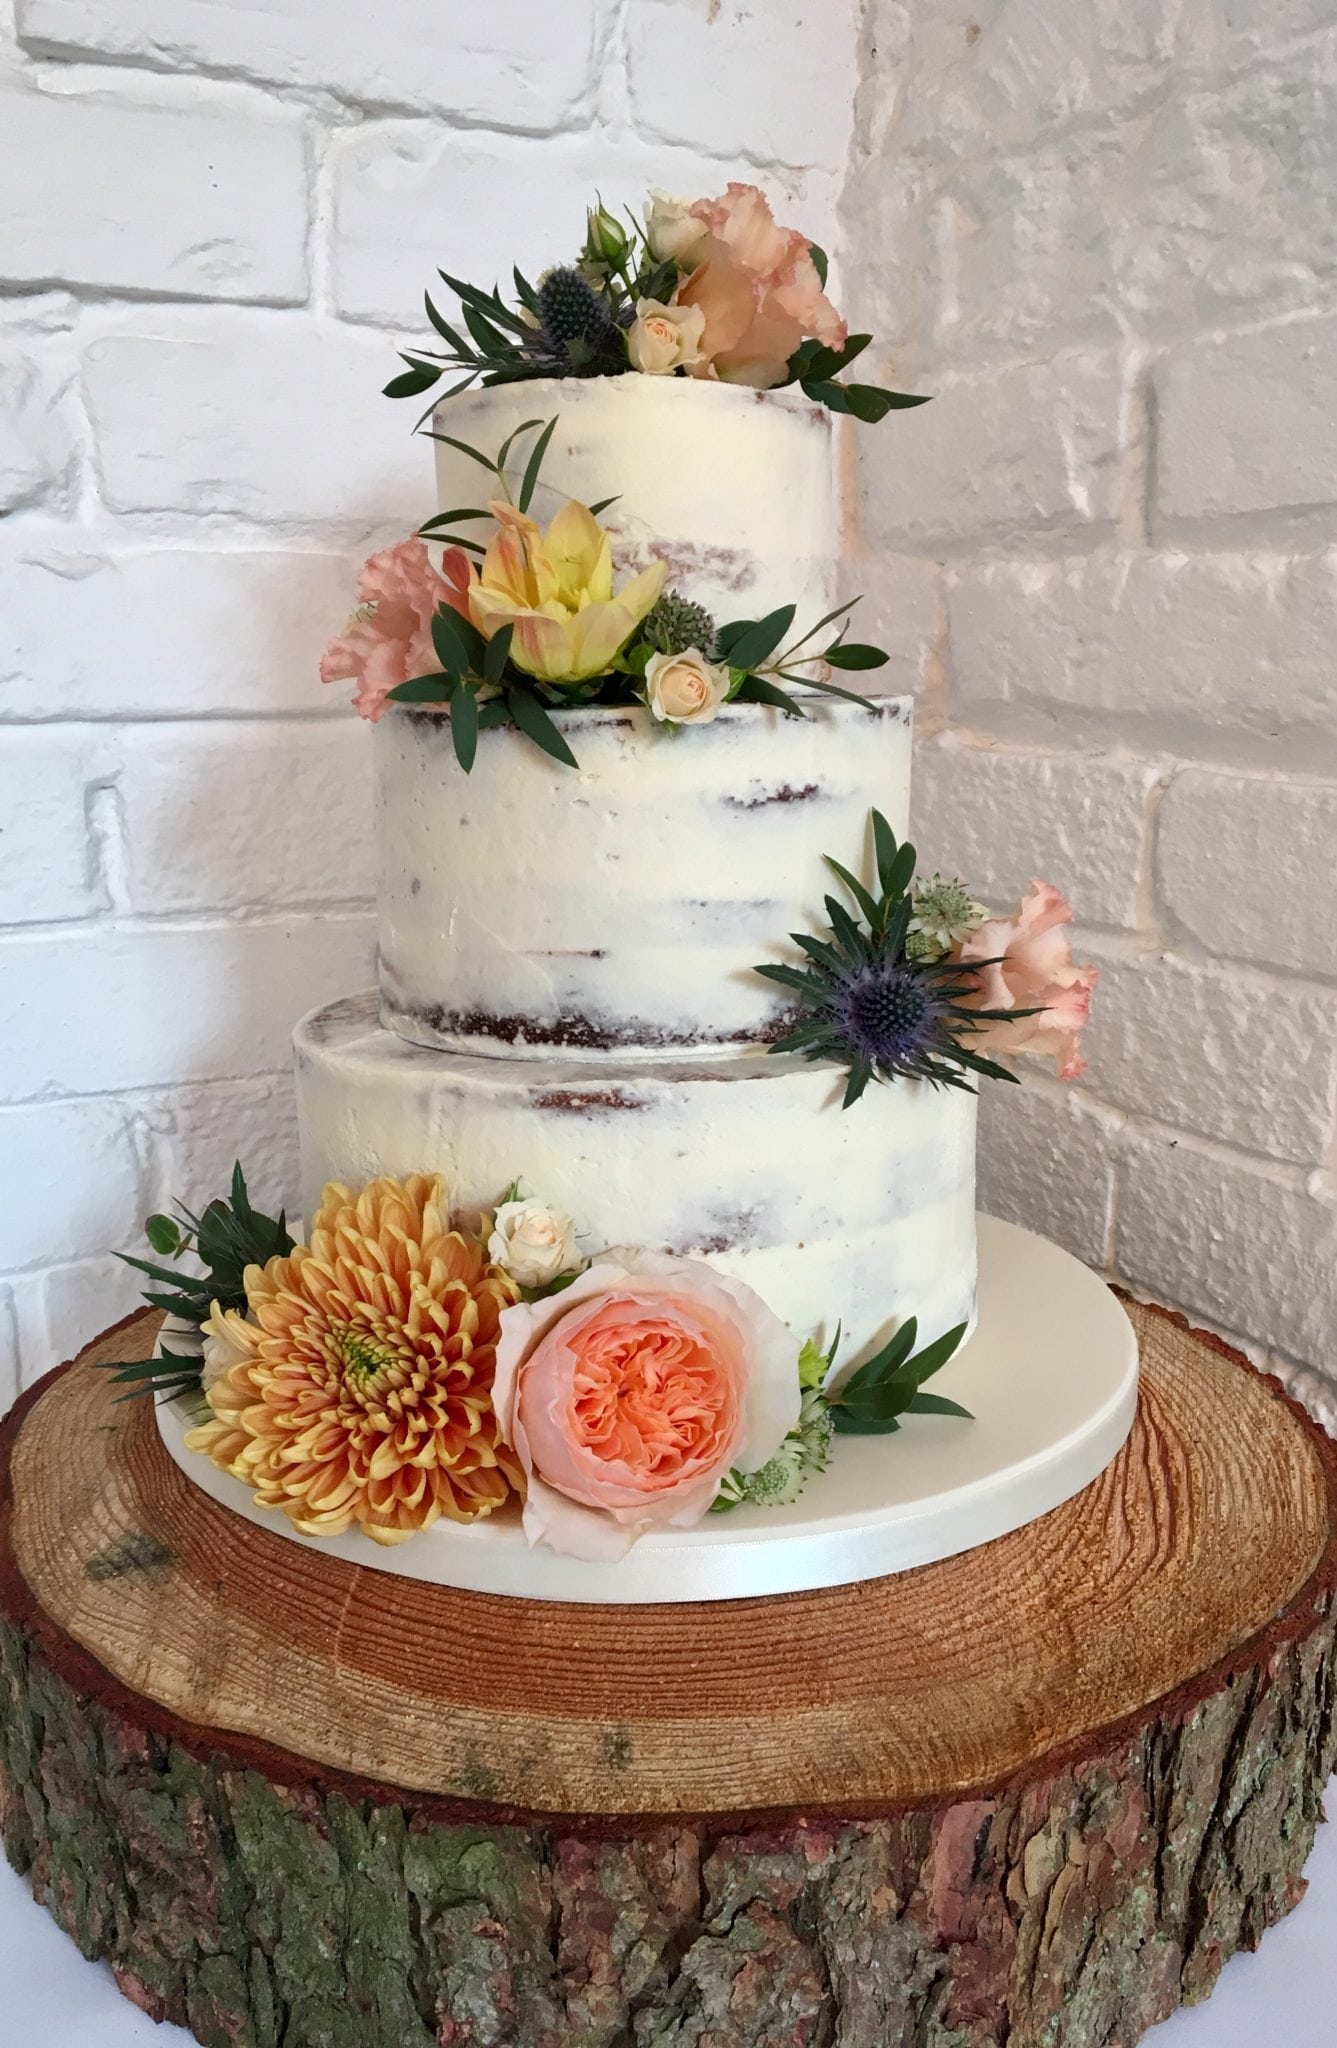 3 Tier Semi-Naked Wedding Cake, Rayleigh – The Old Parish Rooms, 25th May 2018